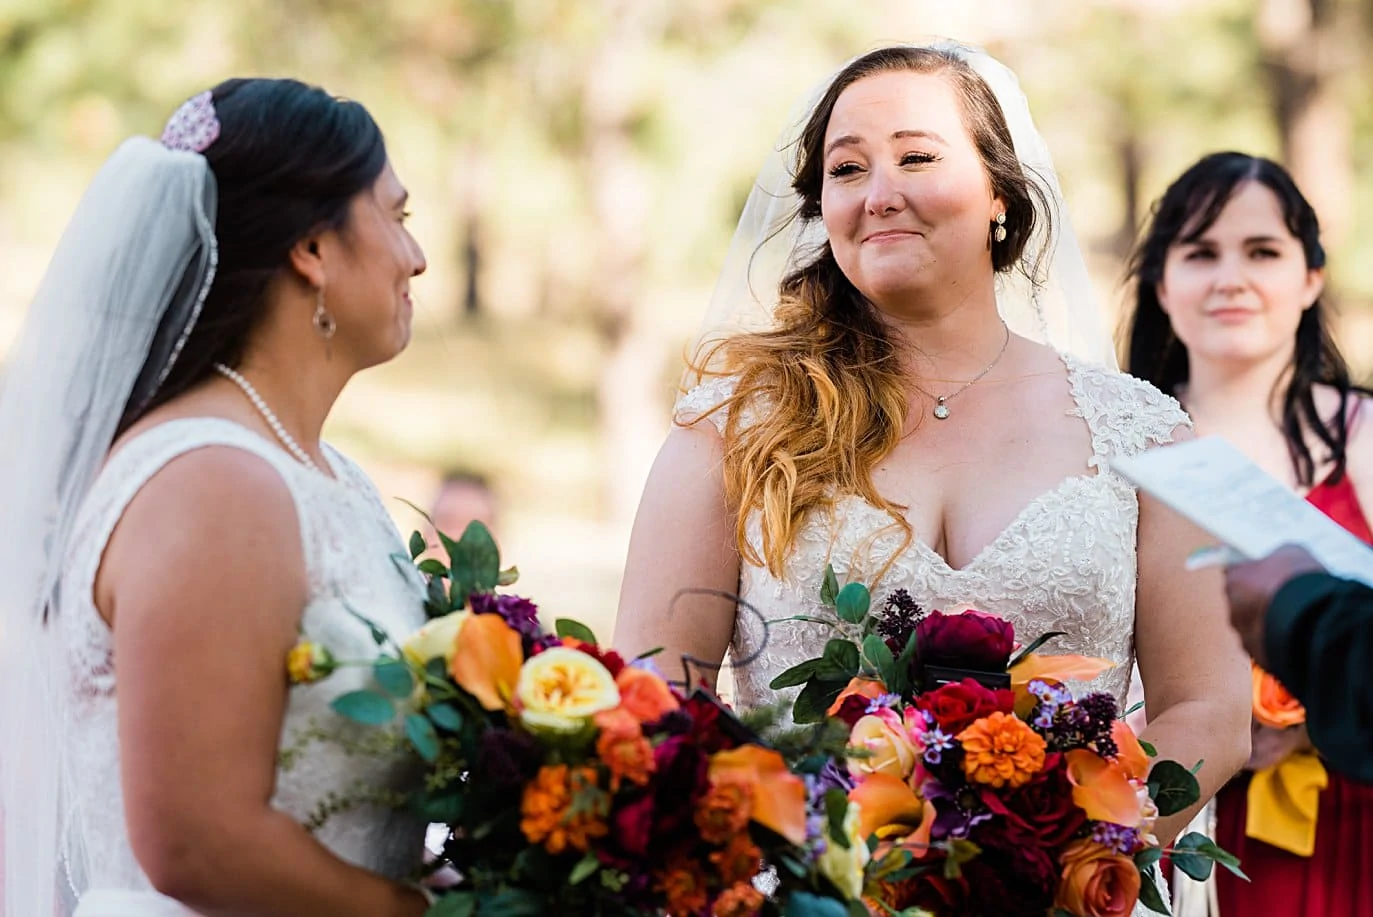 brides look at each other with emotion at start of wedding ceremony at fall Deer Creek Valley Ranch wedding by Denver wedding photographer Jennie Crate